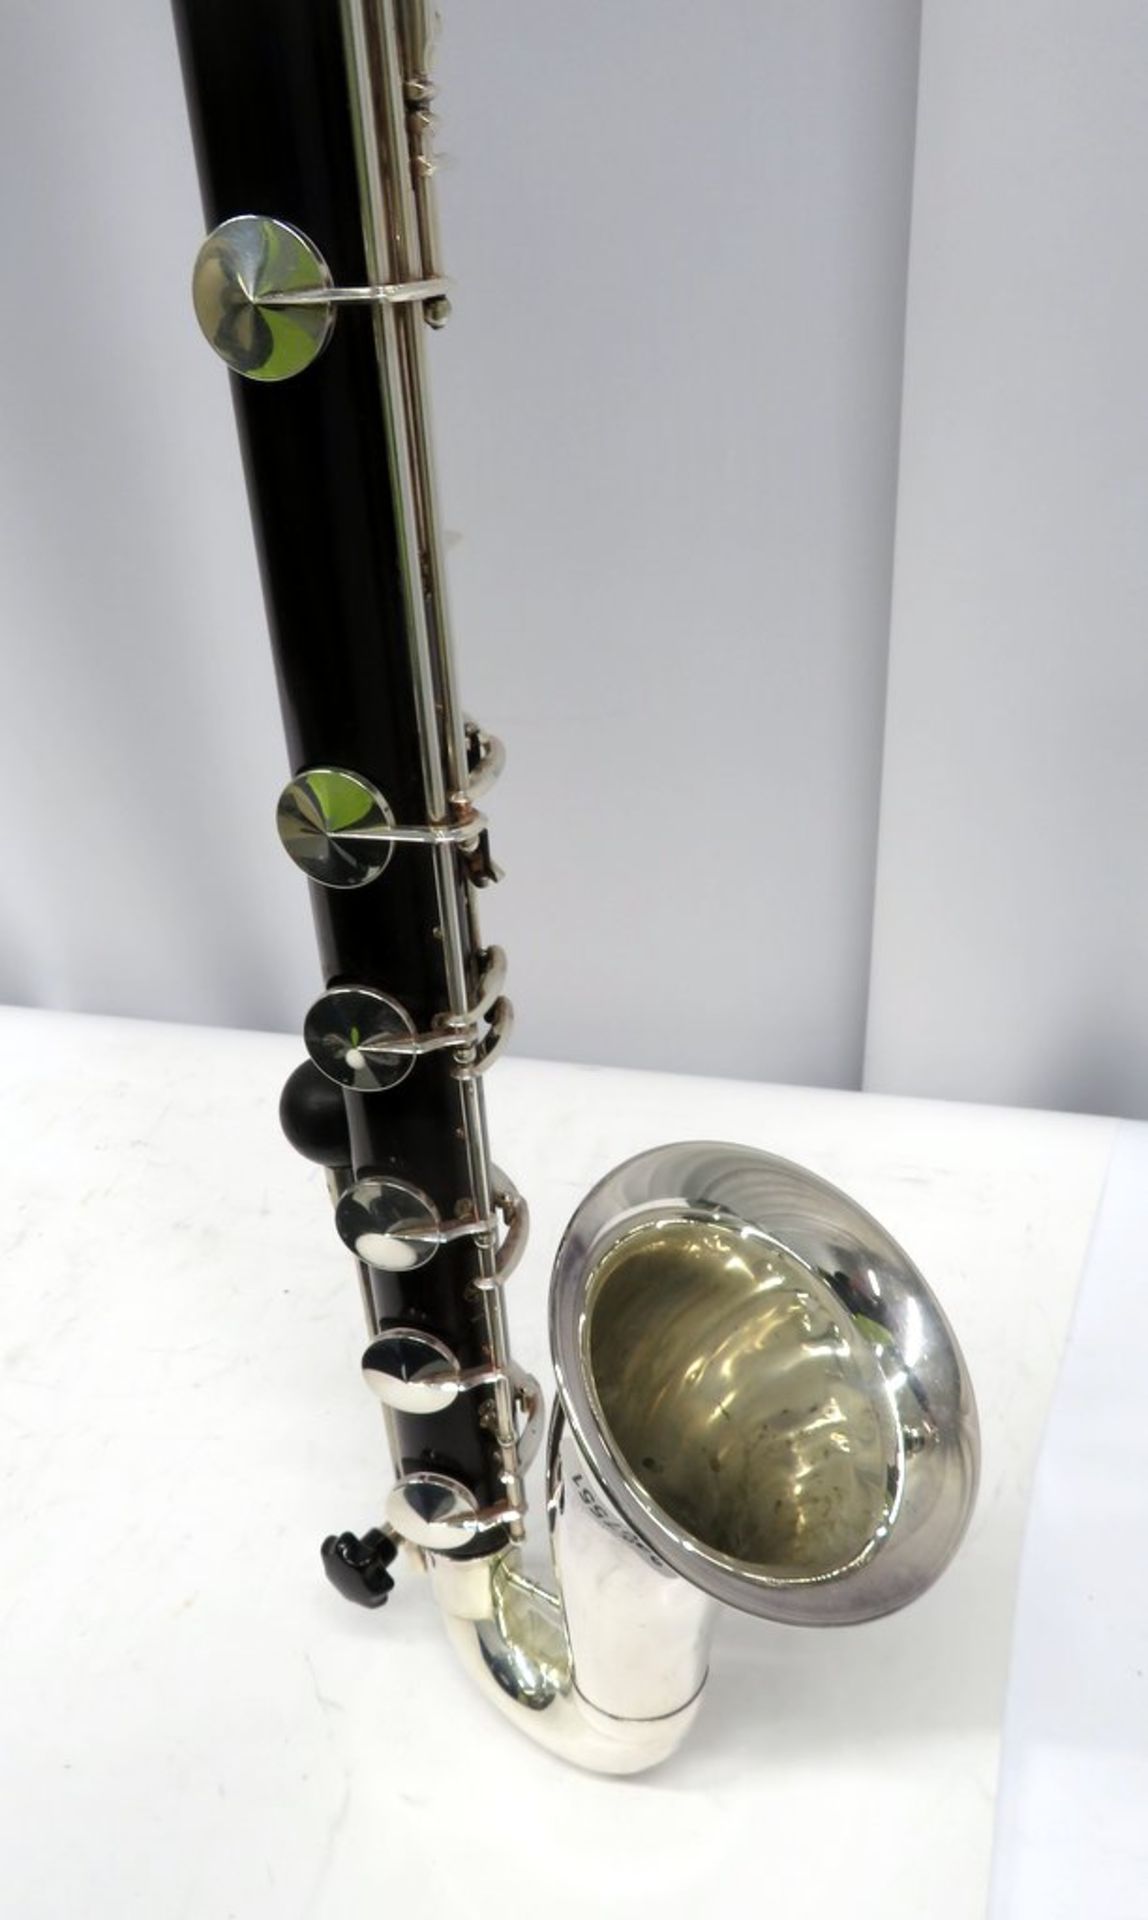 Buffet Crampon Prestige Bass Clarinet With Case. - Image 7 of 23